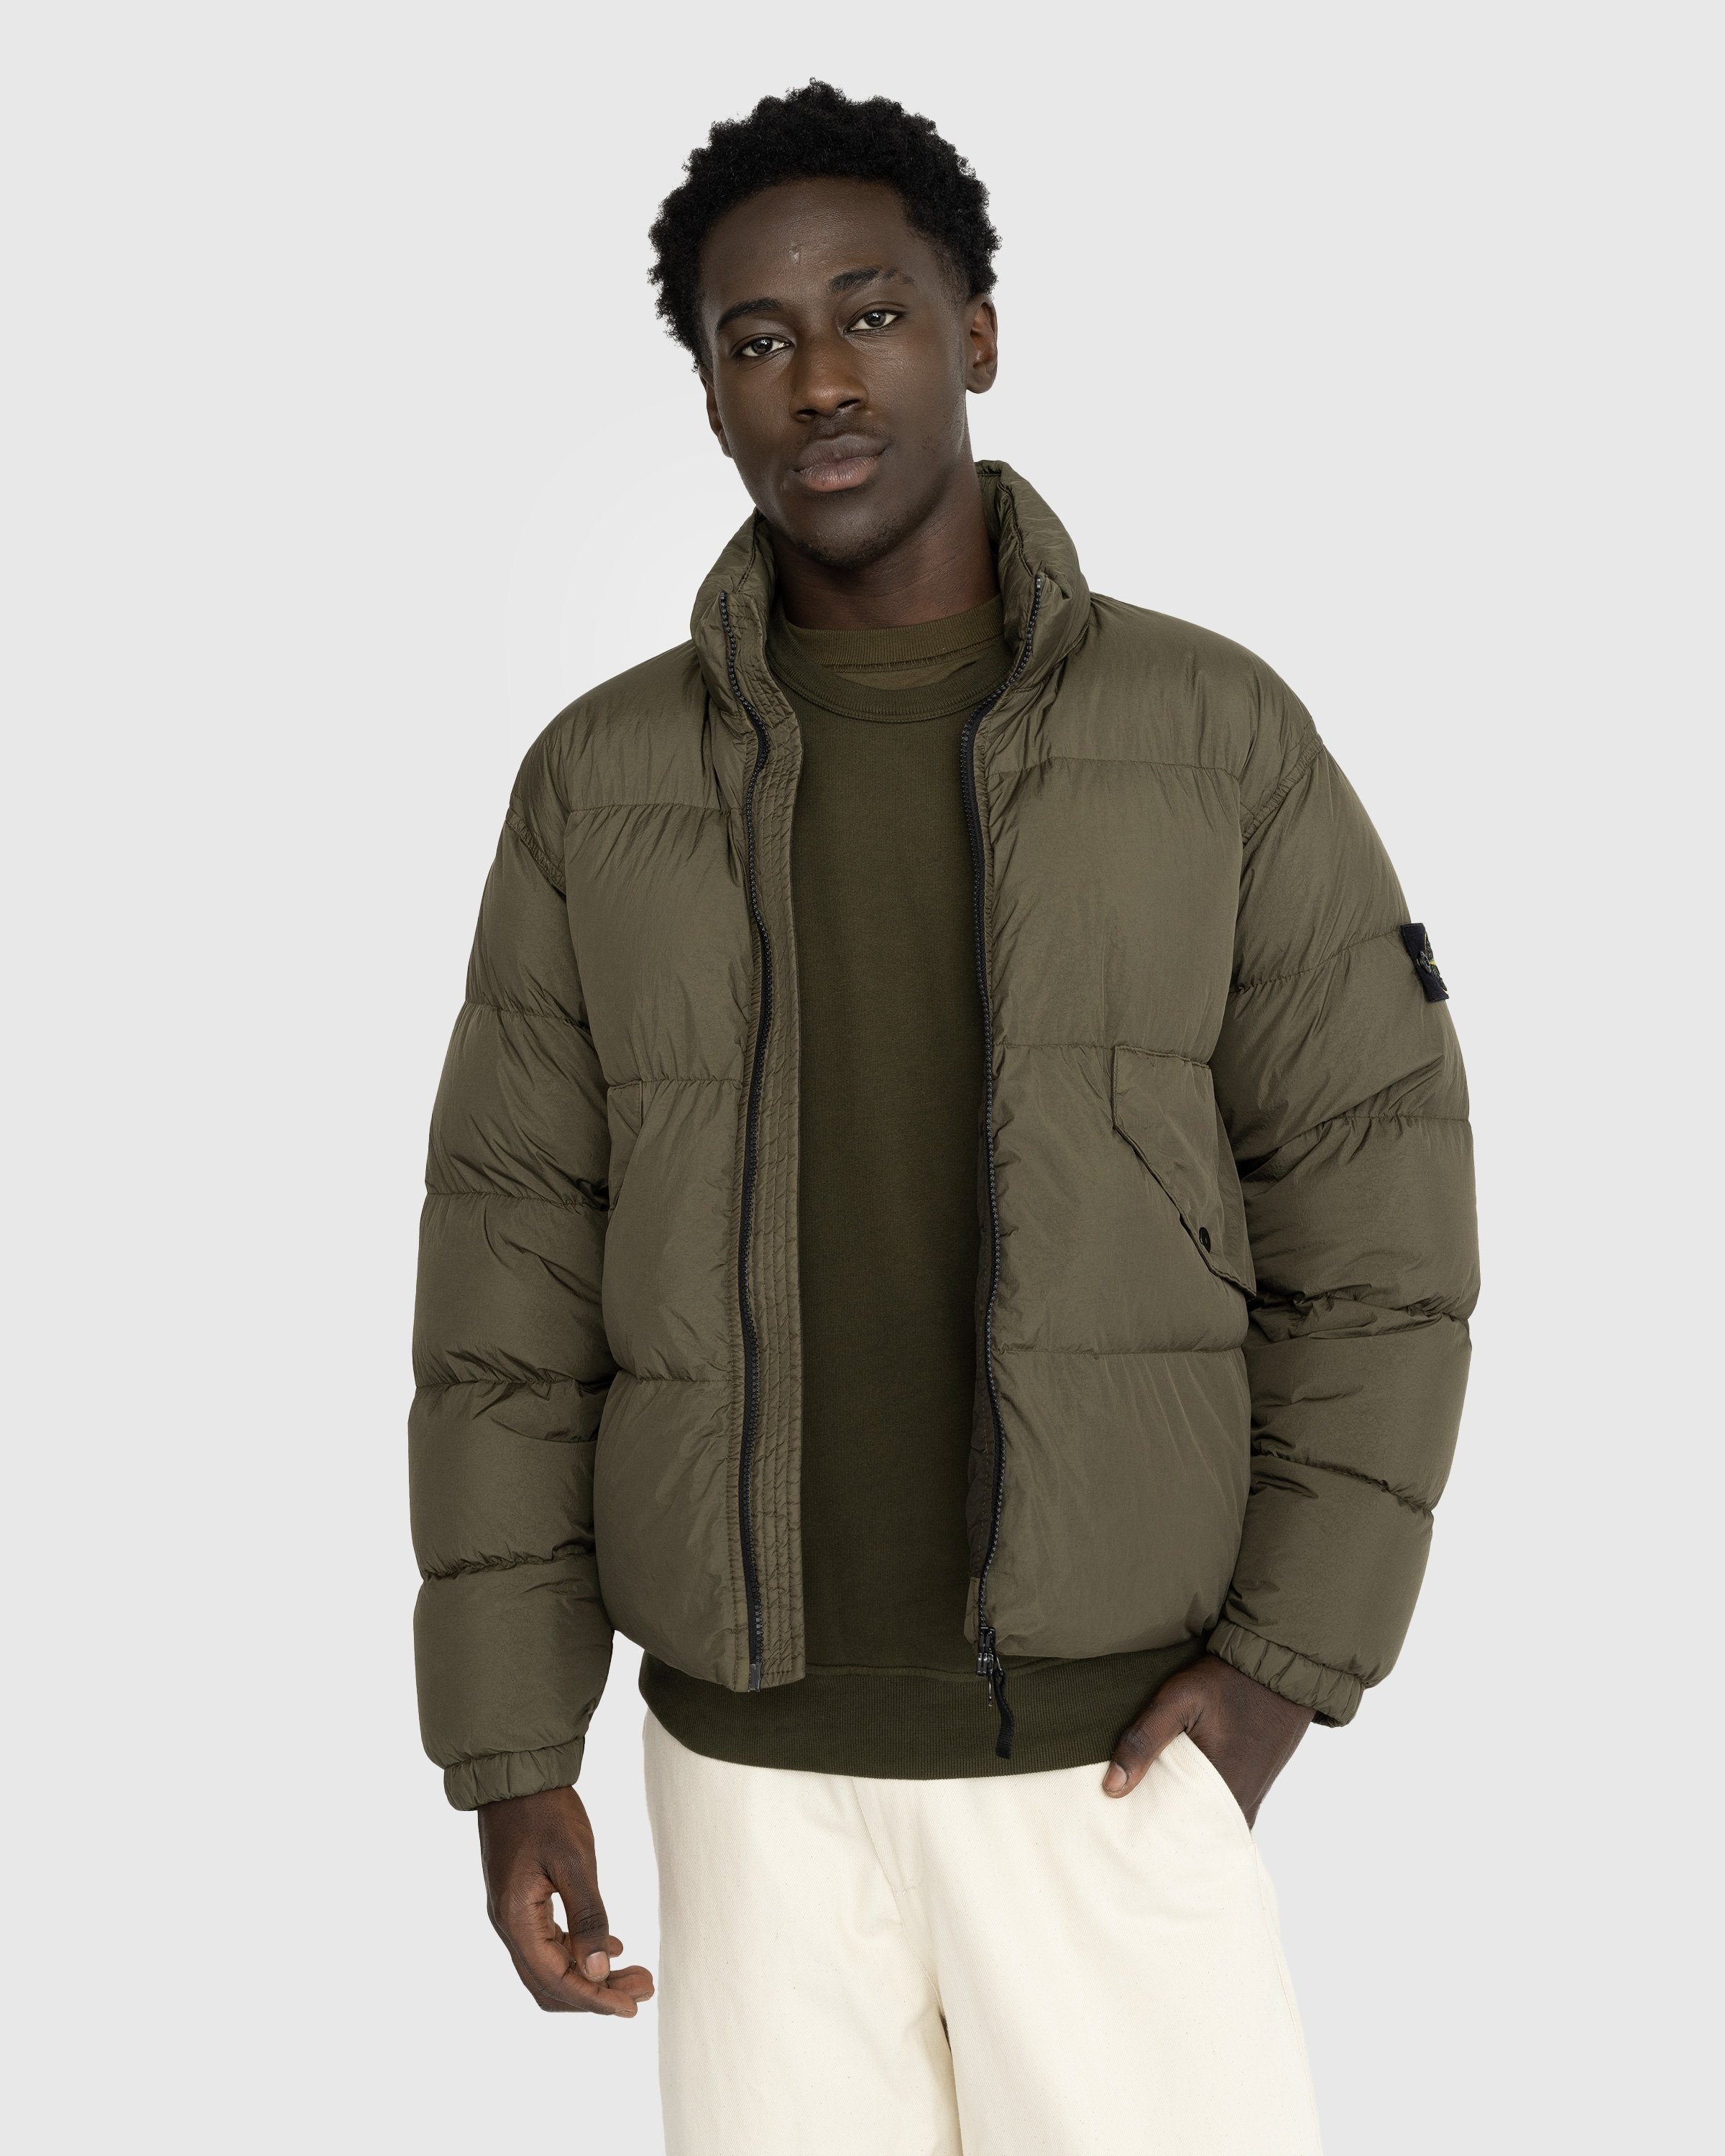 Stone Island – Garment-Dyed Recycled Nylon Down Jacket Olive - Outerwear - Green - Image 2